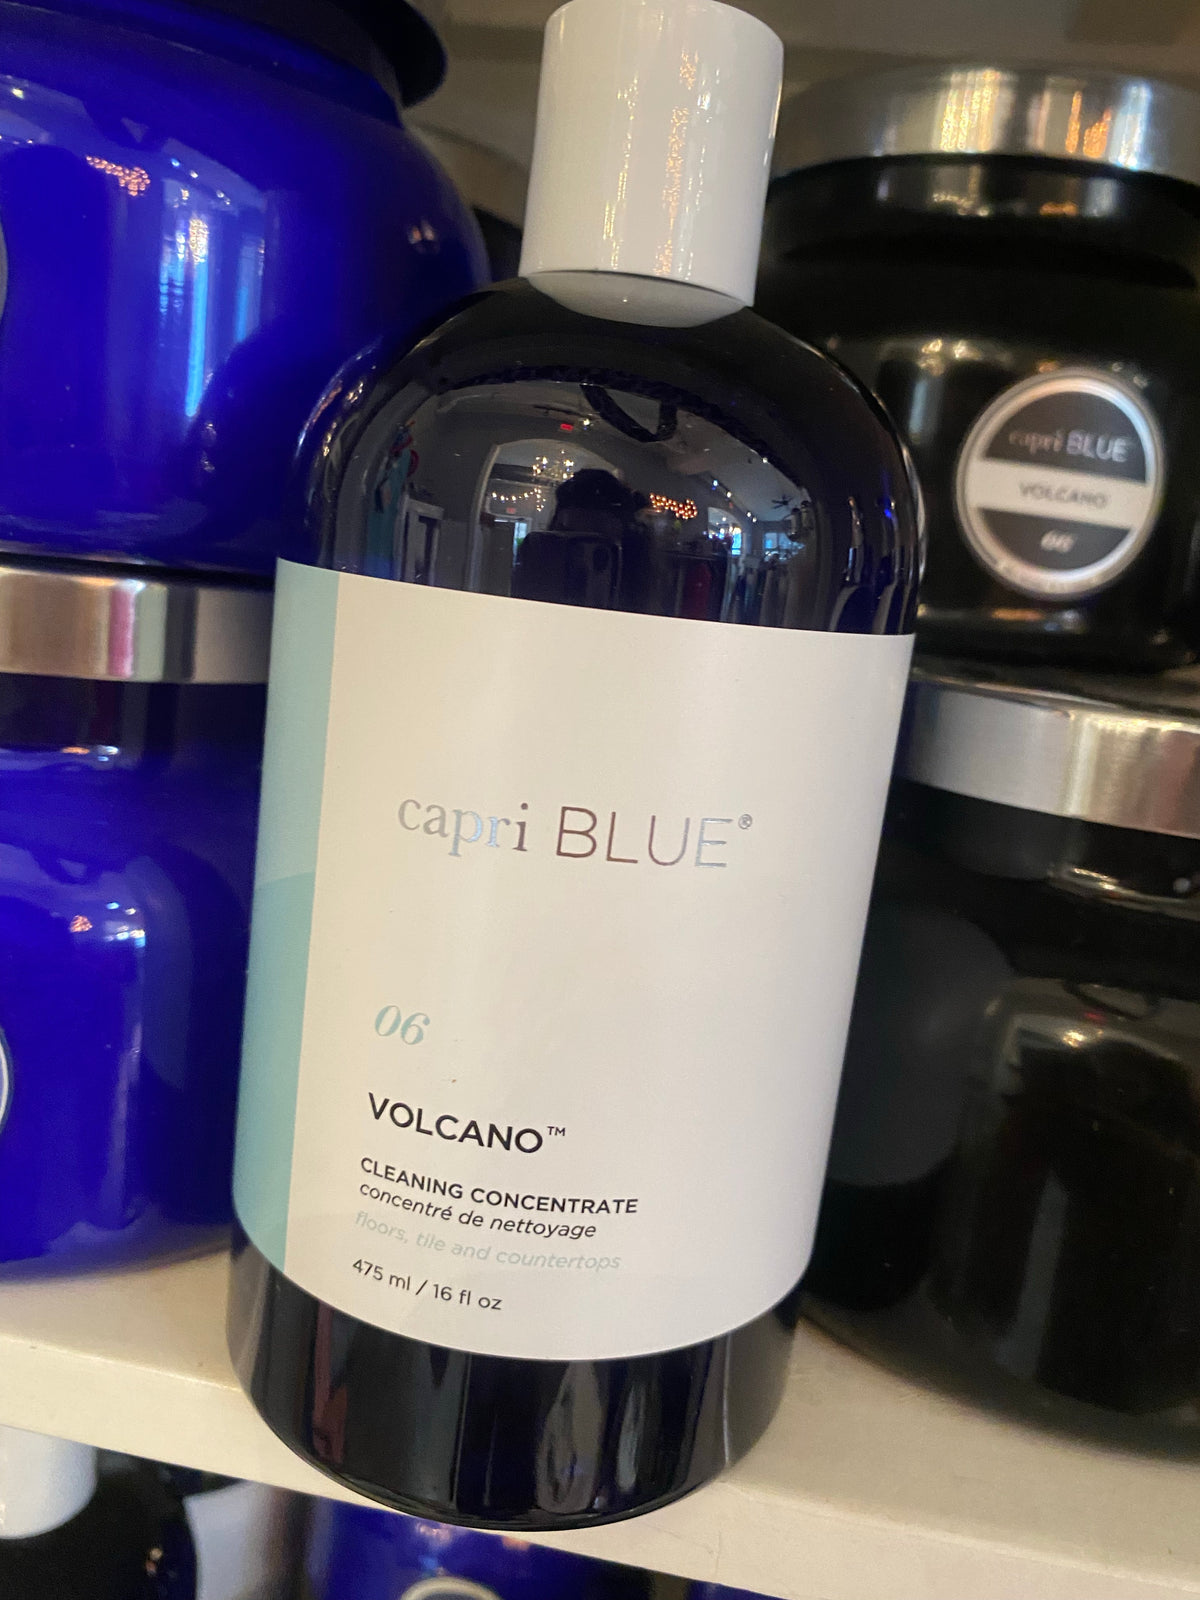 CAPRI BLUE - CLEANING CONCENTRATE - VOLCANO